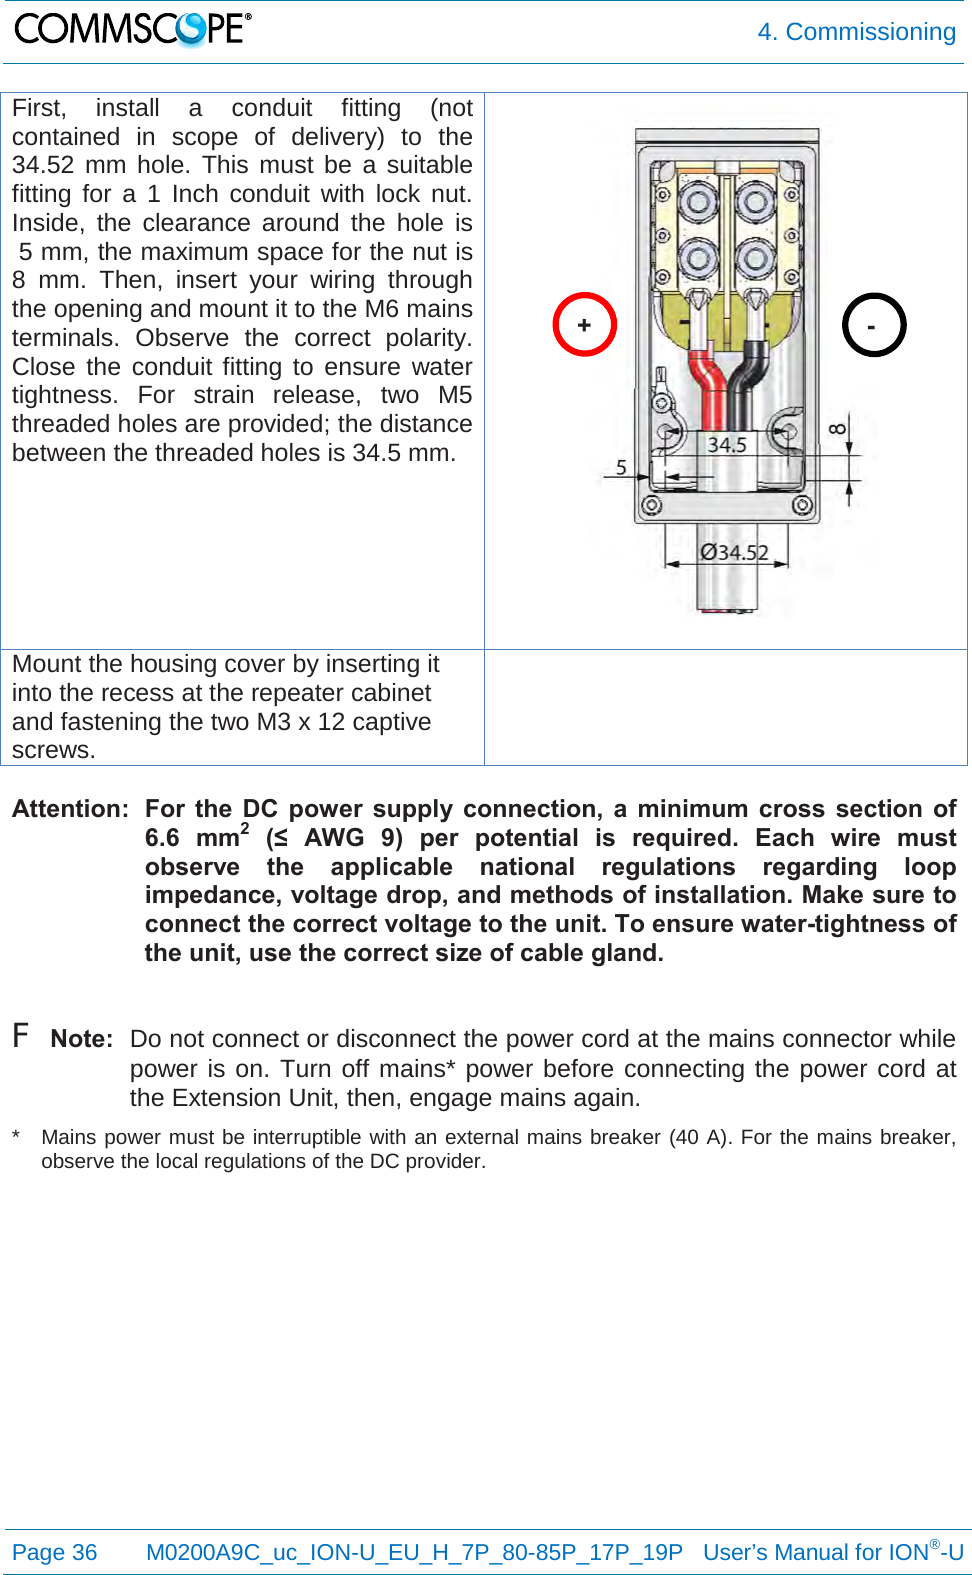  4. Commissioning  Page 36 M0200A9C_uc_ION-U_EU_H_7P_80-85P_17P_19P   User’s Manual for ION®-U  First, install a conduit fitting (not contained in scope of delivery) to the 34.52 mm hole. This must be a suitable fitting for a 1 Inch conduit with lock nut.  Inside, the clearance around the hole is  5 mm, the maximum space for the nut is 8 mm. Then, insert your wiring through the opening and mount it to the M6 mains terminals. Observe the correct polarity. Close the conduit fitting to ensure water tightness. For strain release, two M5 threaded holes are provided; the distance between the threaded holes is 34.5 mm.  Mount the housing cover by inserting it into the recess at the repeater cabinet and fastening the two M3 x 12 captive screws.   Attention:  For the DC power supply connection, a minimum cross section of 6.6 mm2 (≤  AWG  9)  per  potential  is required. Each wire must observe the applicable national regulations regarding loop impedance, voltage drop, and methods of installation. Make sure to connect the correct voltage to the unit. To ensure water-tightness of the unit, use the correct size of cable gland.  F Note:  Do not connect or disconnect the power cord at the mains connector while power is on. Turn off mains* power before connecting the power cord at the Extension Unit, then, engage mains again. *  Mains power must be interruptible with an external mains breaker (40 A). For the mains breaker, observe the local regulations of the DC provider.    + - 